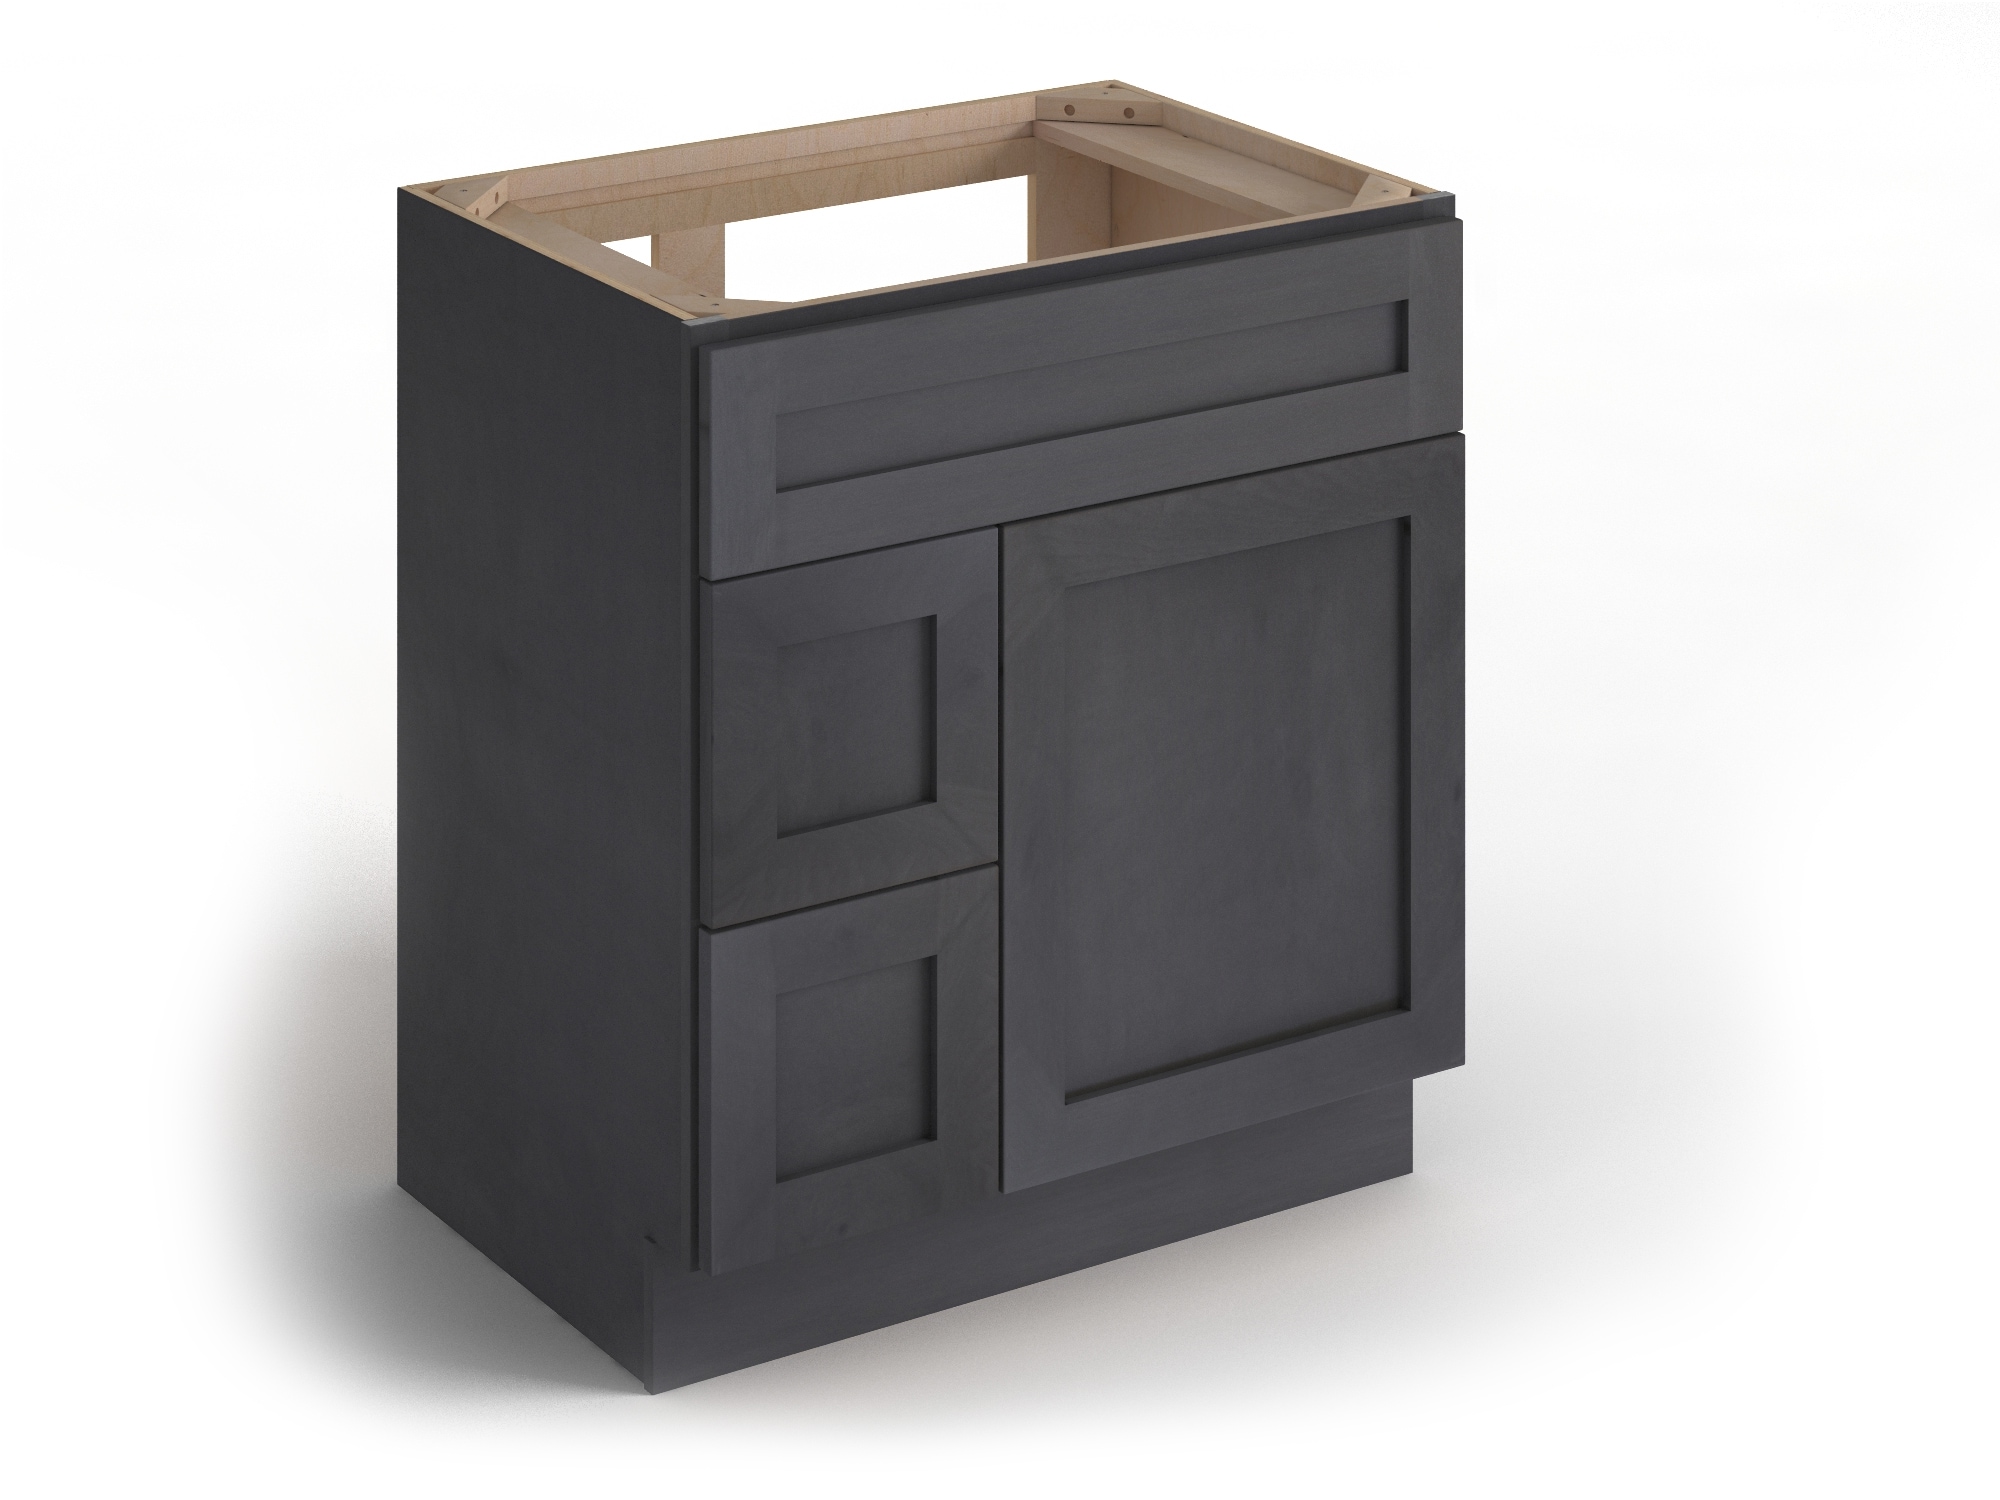 Valleywood Cabinetry Ideal Gray 30-in W x 34.5-in H x 21-in D Bathroom ...